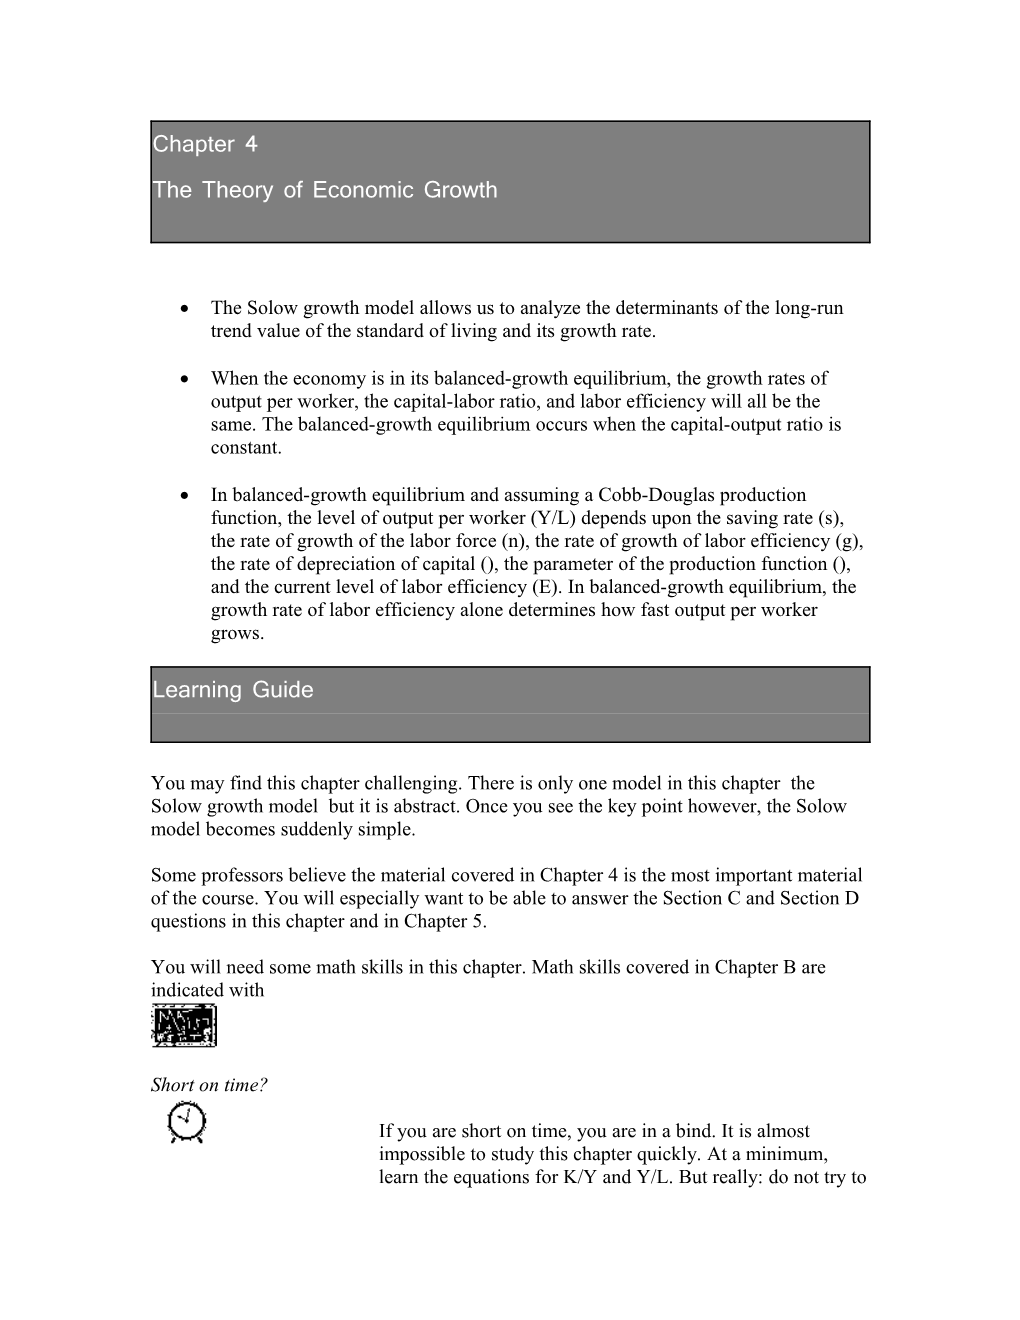 The Theory of Economic Growth